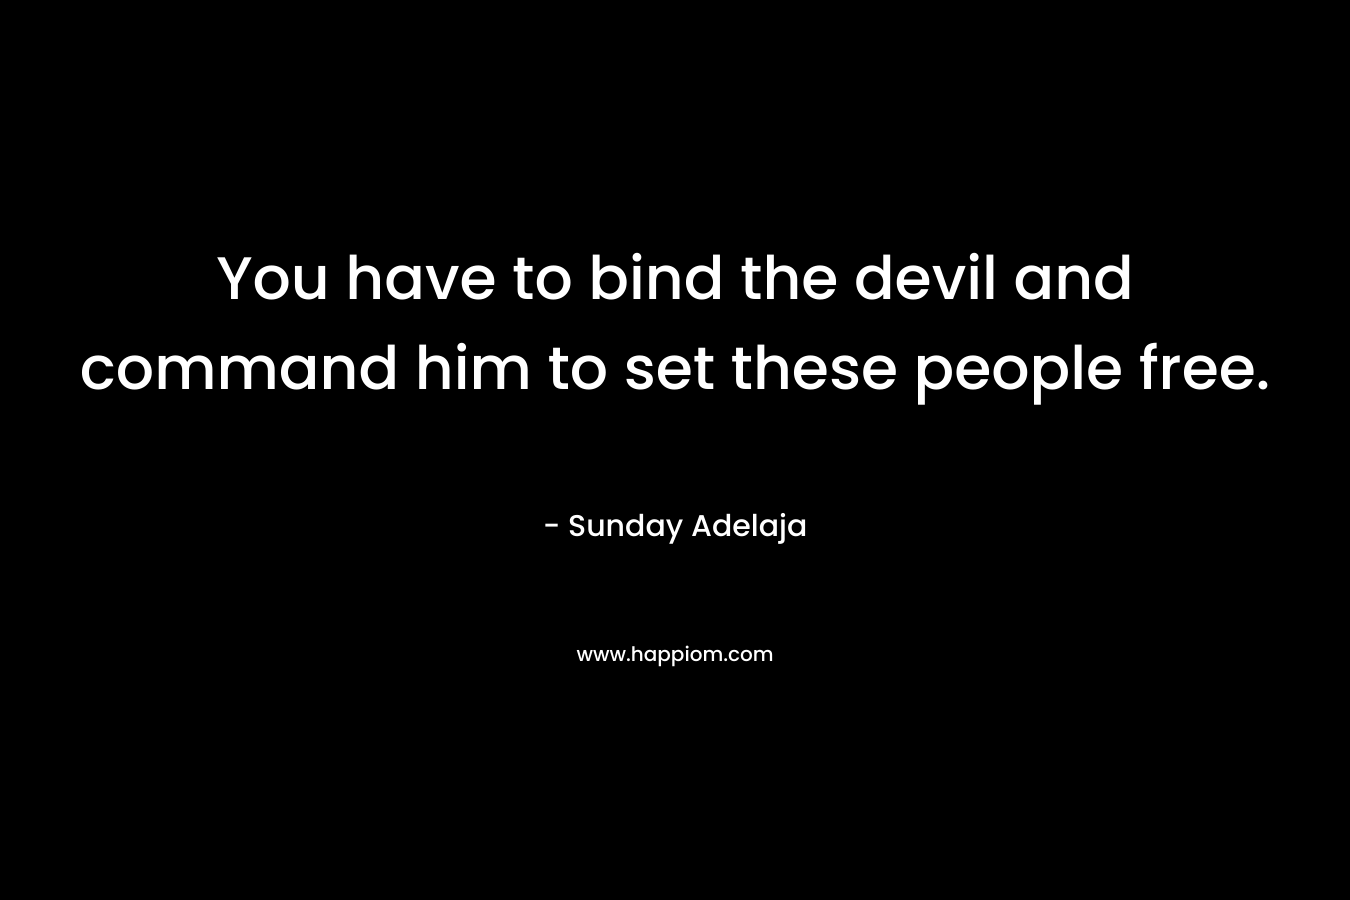 You have to bind the devil and command him to set these people free.